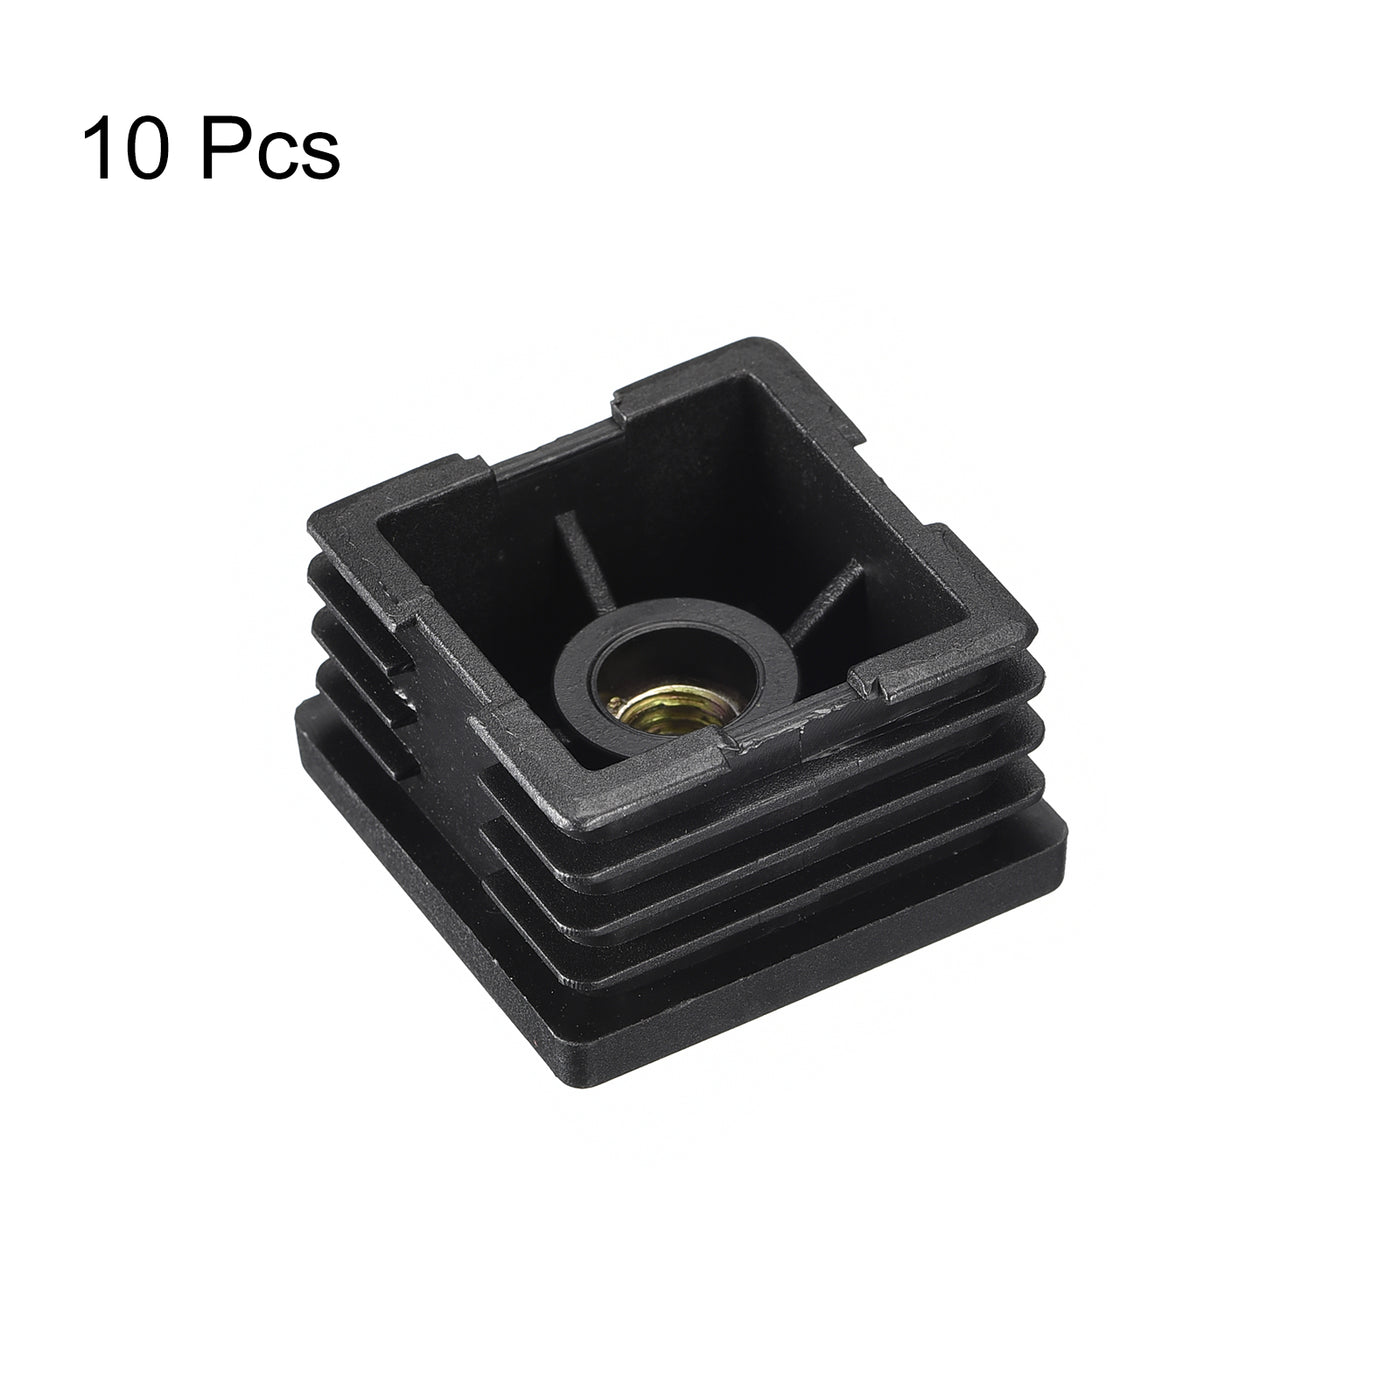 uxcell Uxcell 10Pcs 1.57"x1.57" Caster Insert with Thread, Square M8 Thread for Furniture